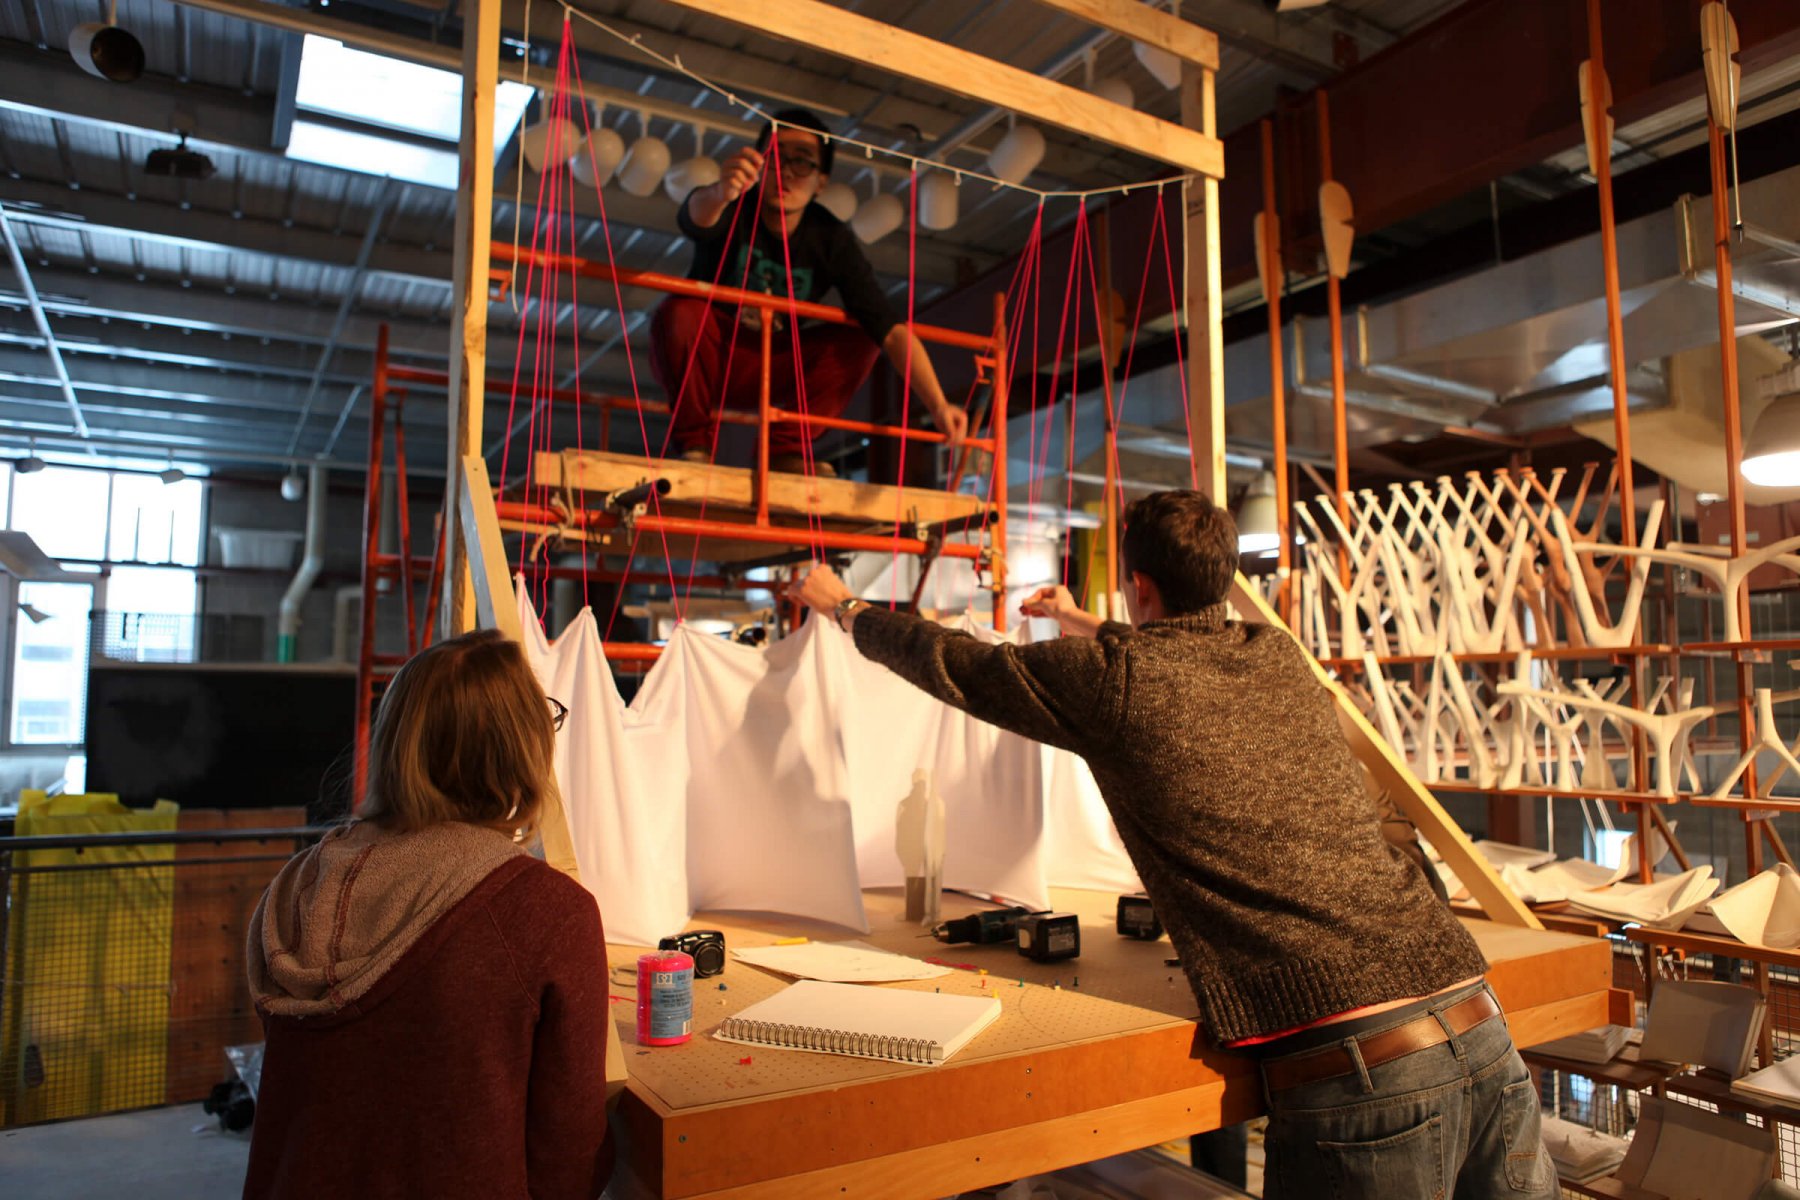 Students work at a frame with cloth at the Centre for Architectural Structures and Technology. Photo by Lancelot Coa